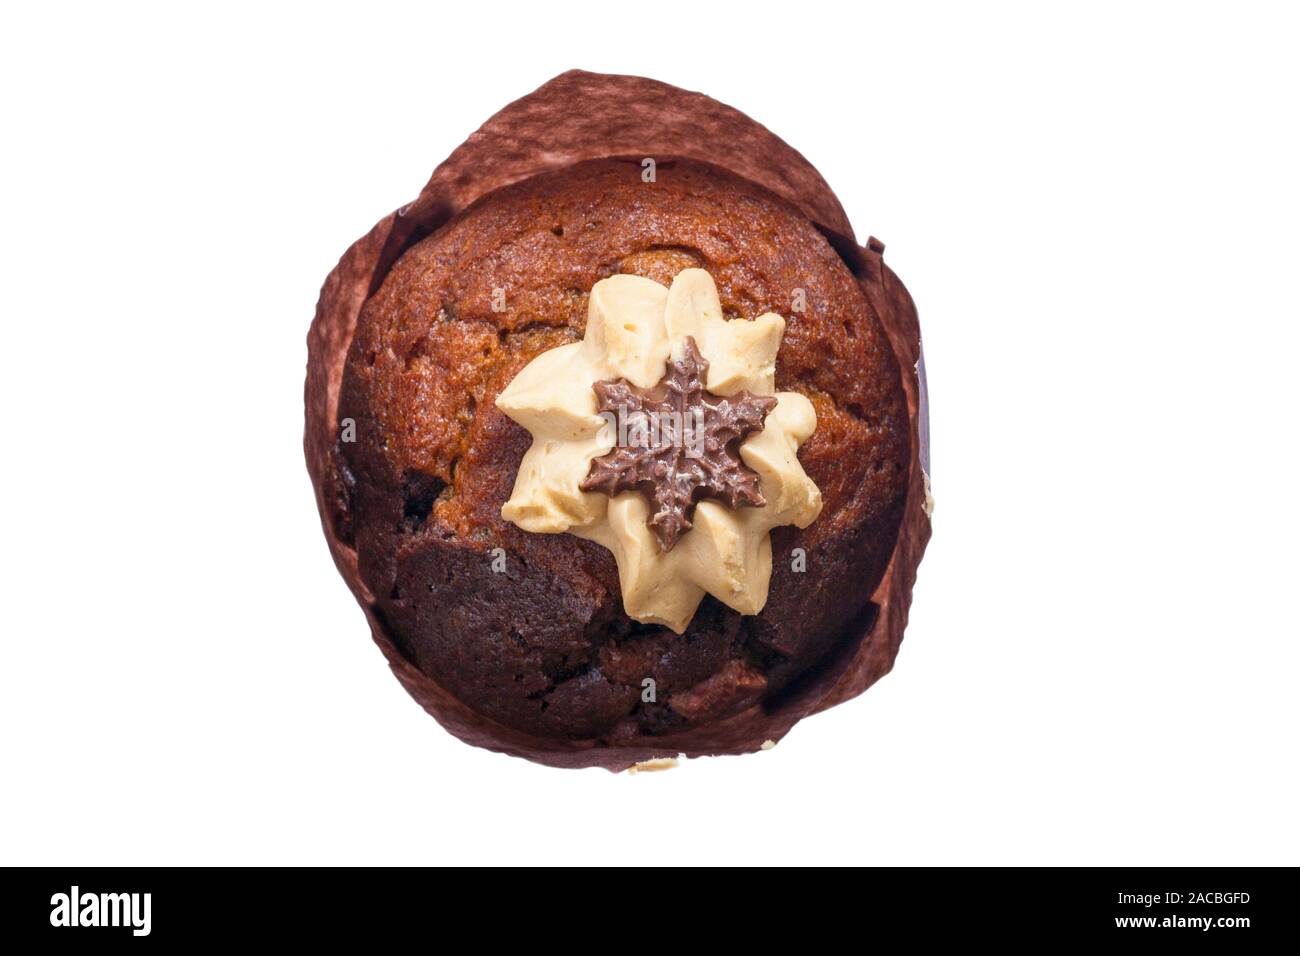 Salted caramel muffin with chocolate star decoration fresh from M&S in-store bakery isolated on white background Stock Photo